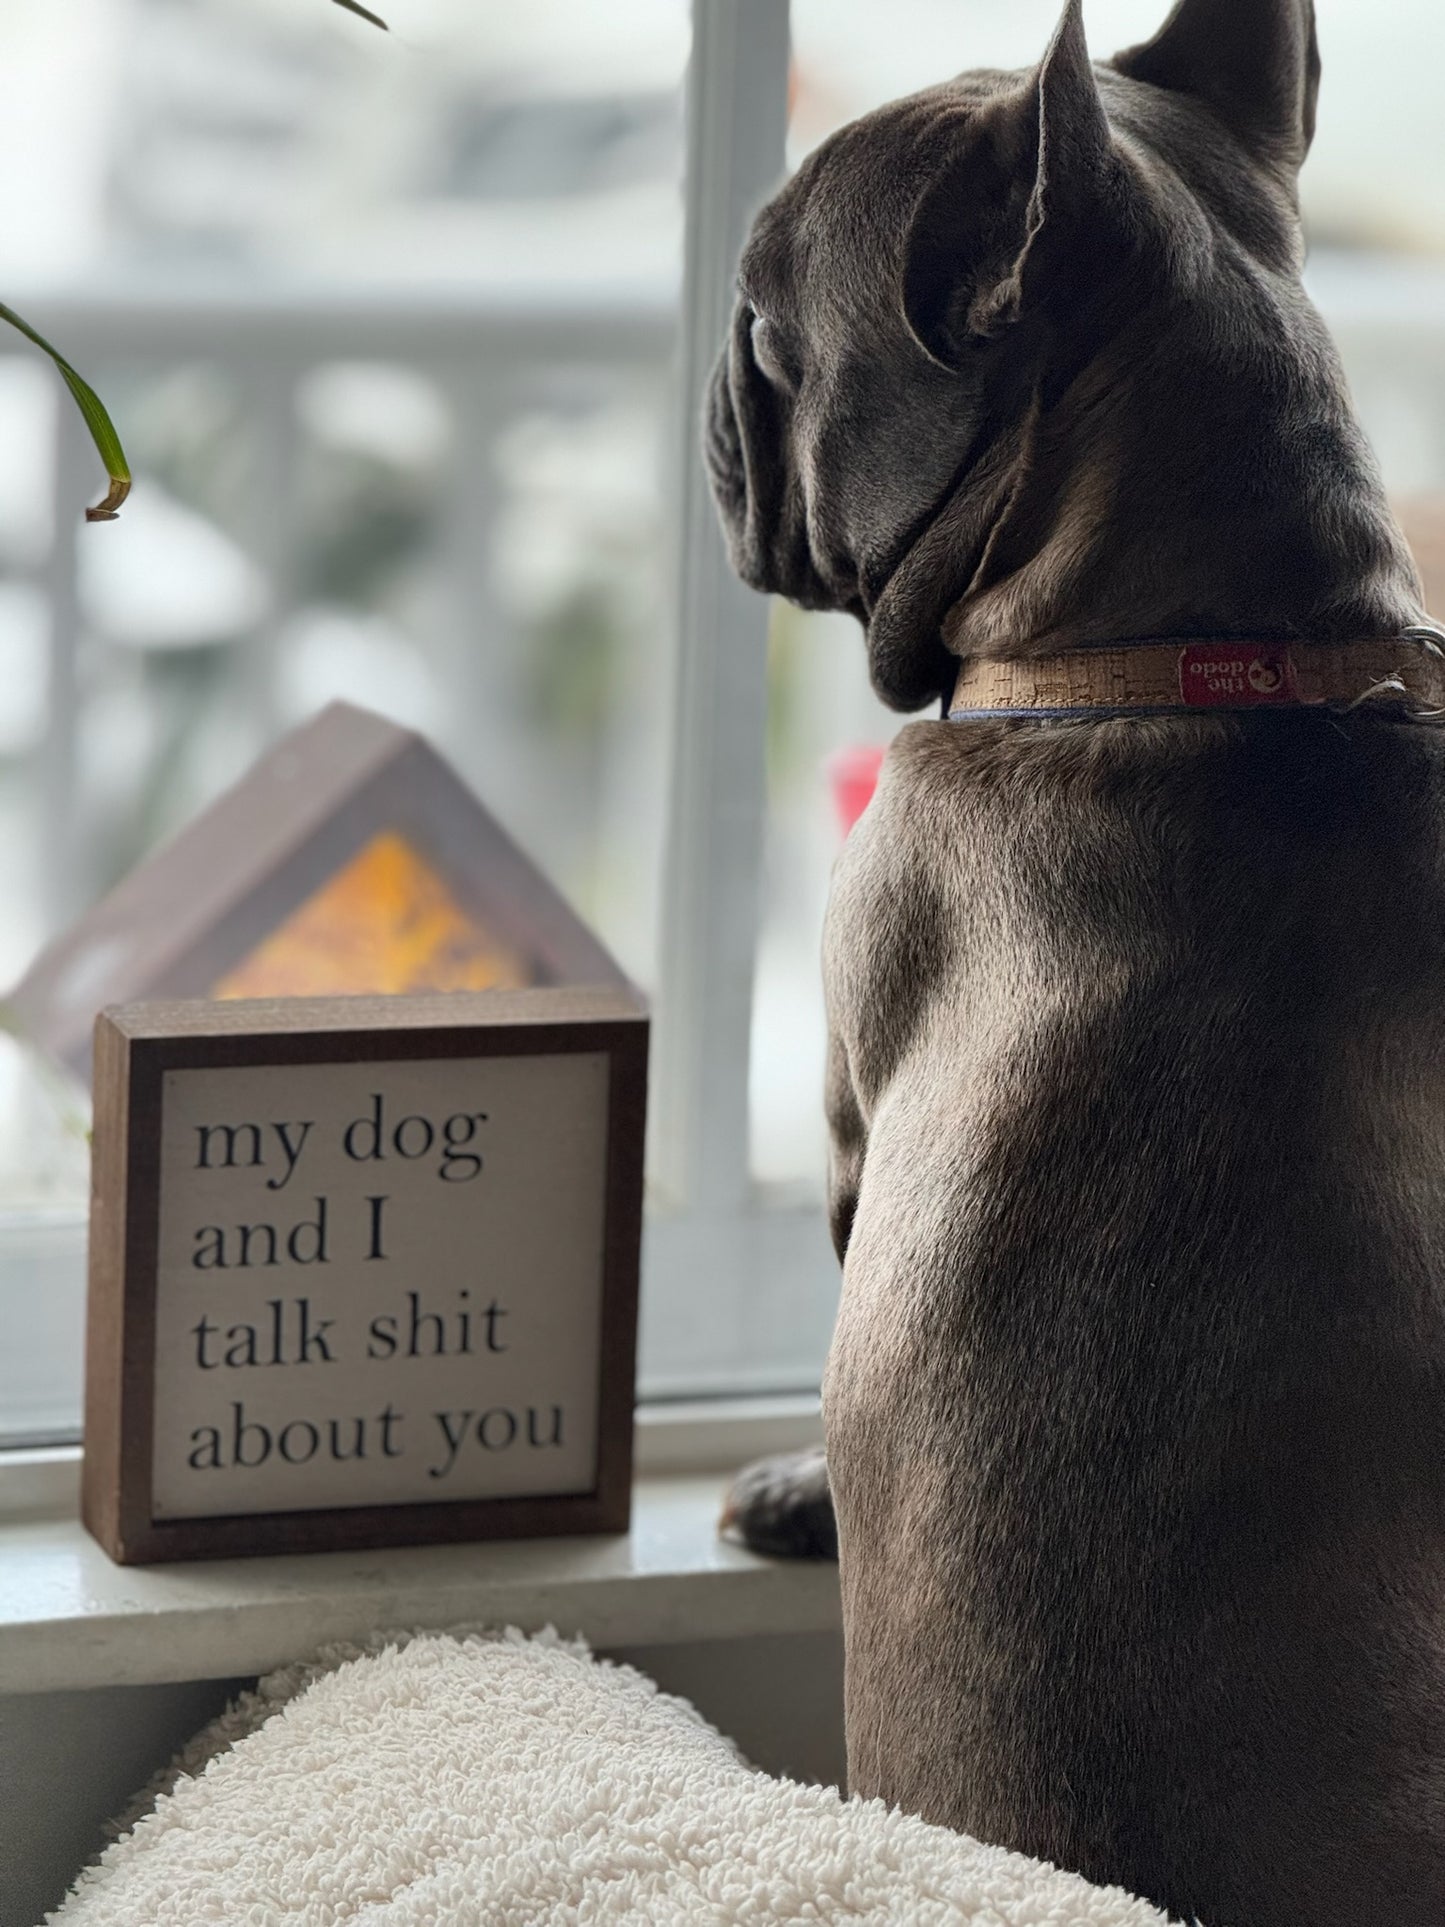 My Dog And I Talk About You Sign